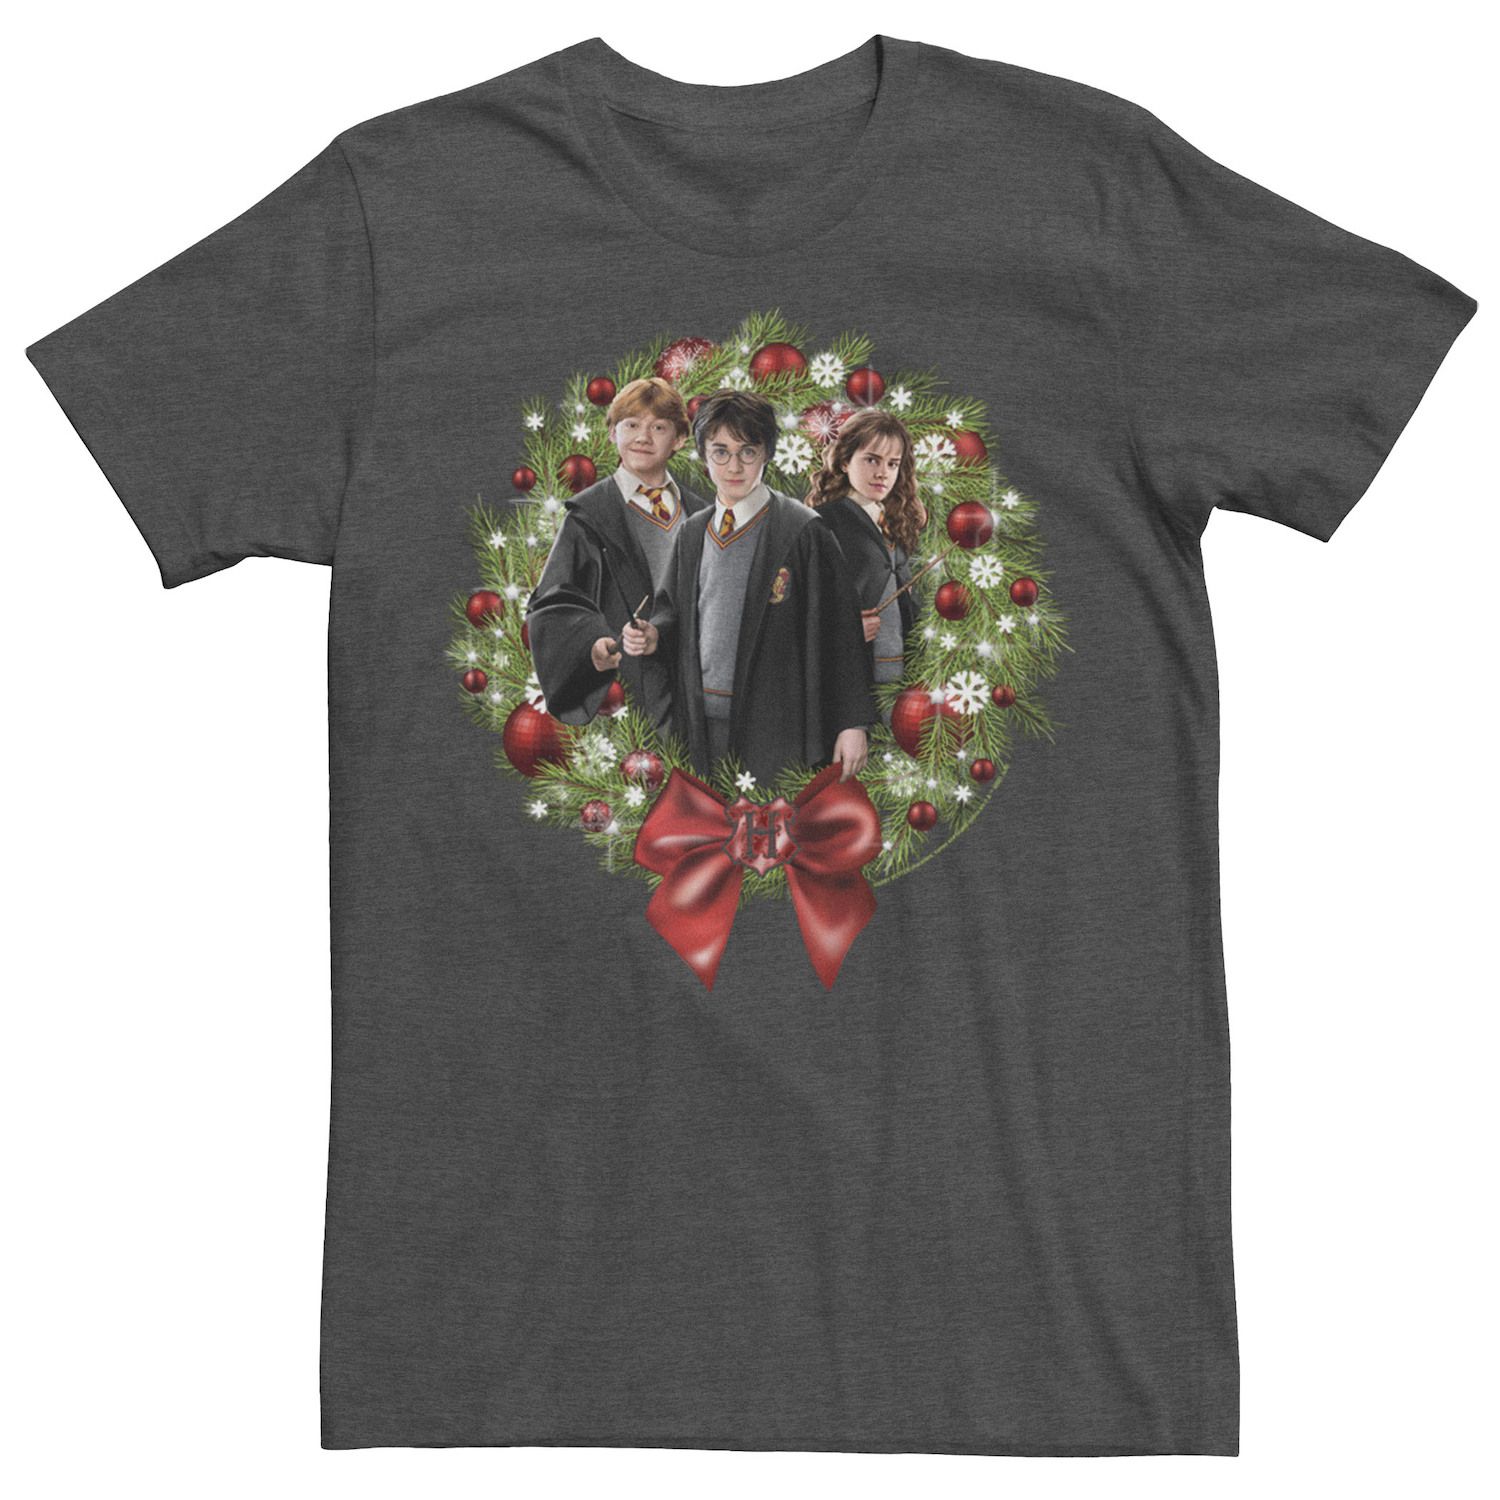 Image for Harry Potter Men's Christmas Group Shot Wreath Tee at Kohl's.